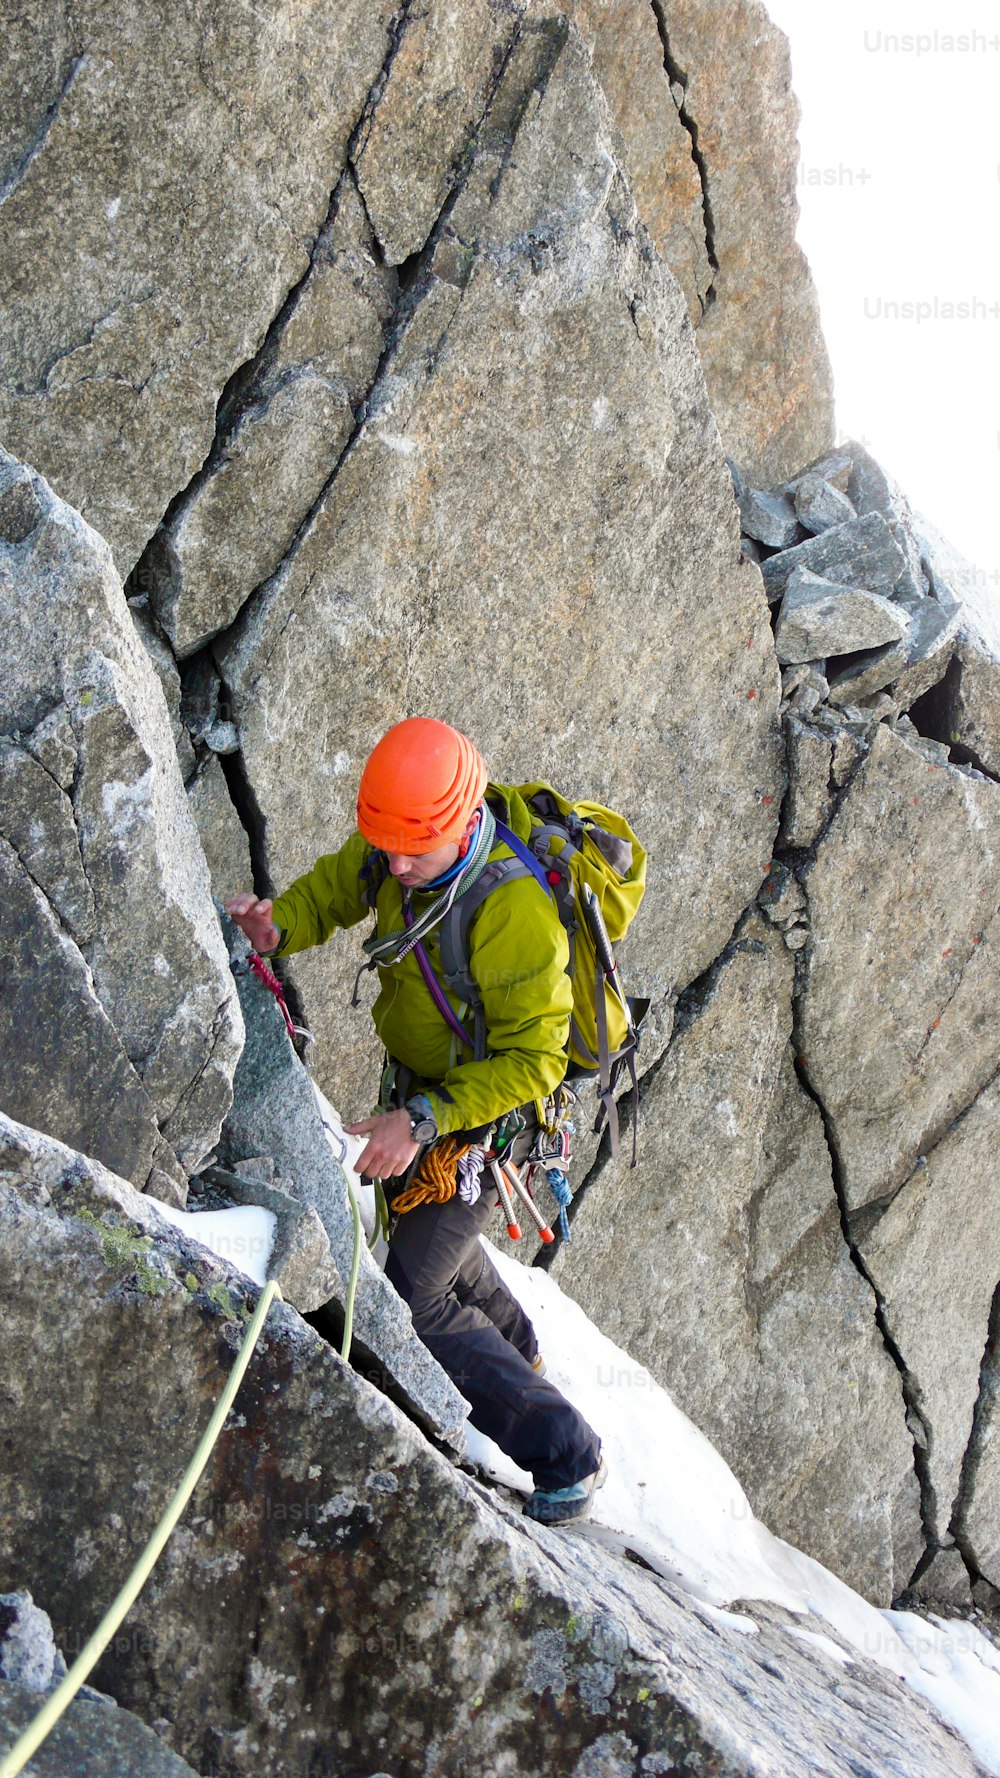 A male mountain climber traverses a tricky rock chimney on his way to a high alpine summit